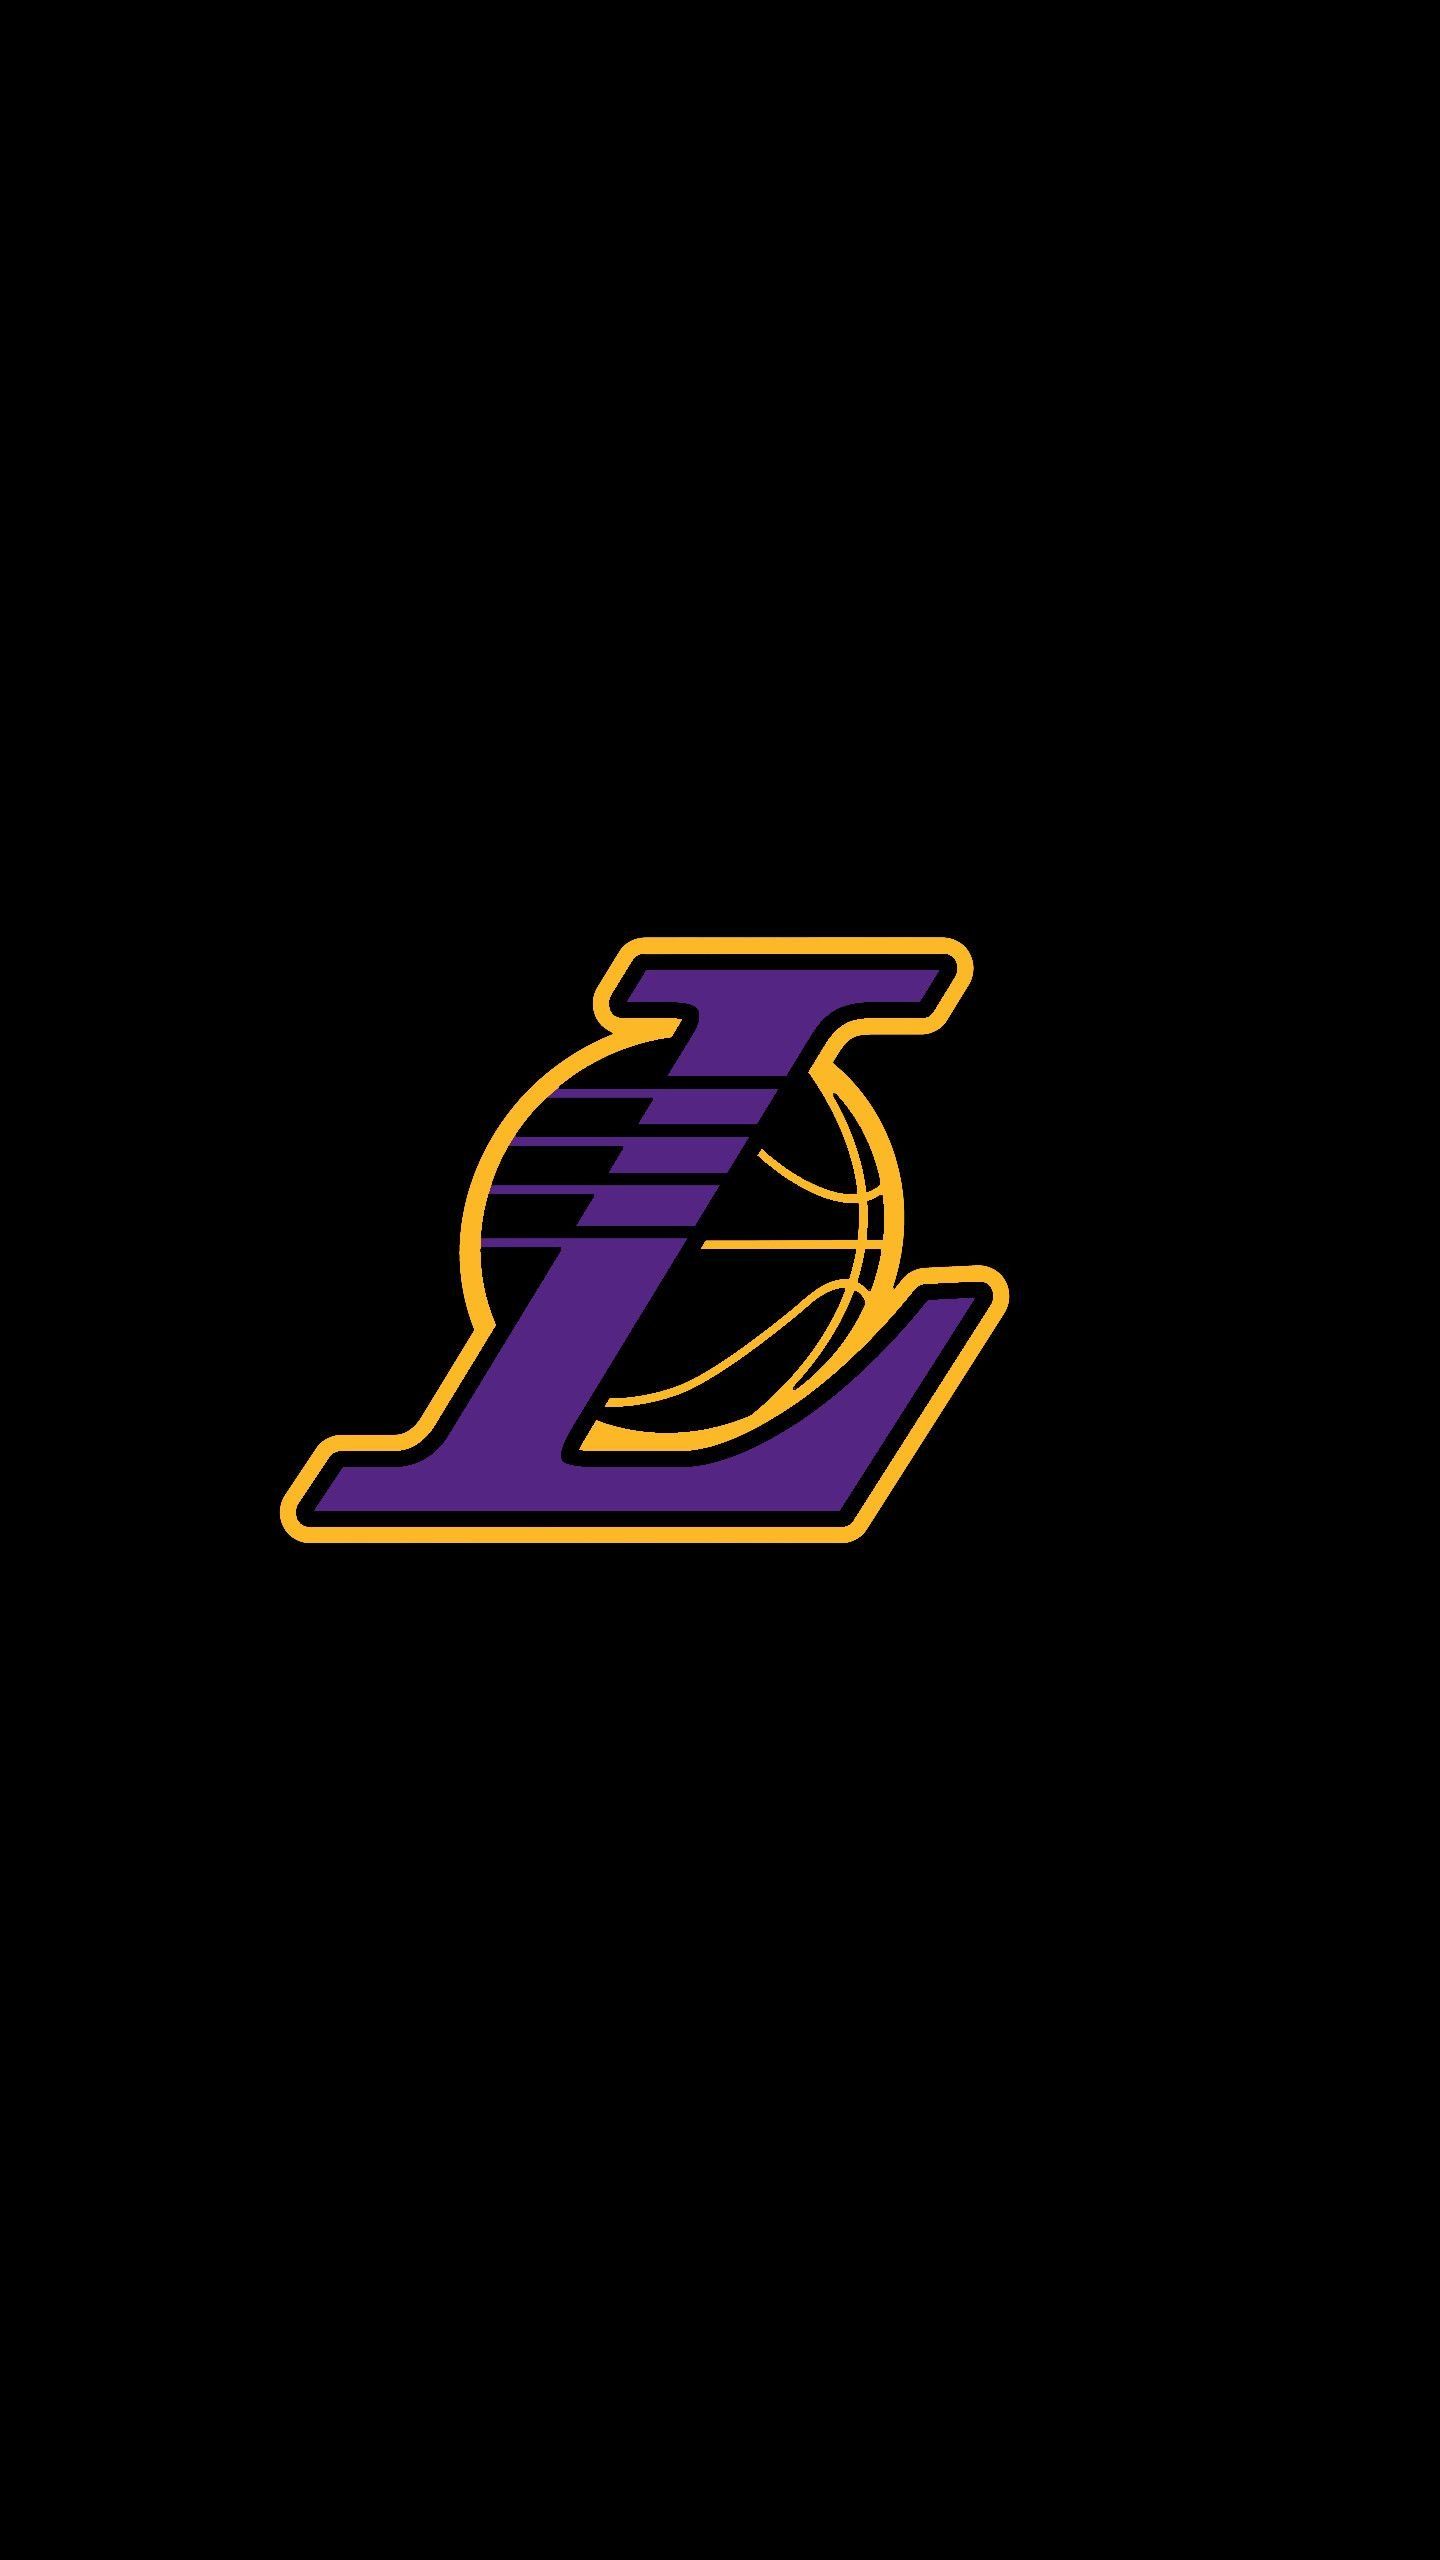 High Quality Lakers Wallpaper iPhone X